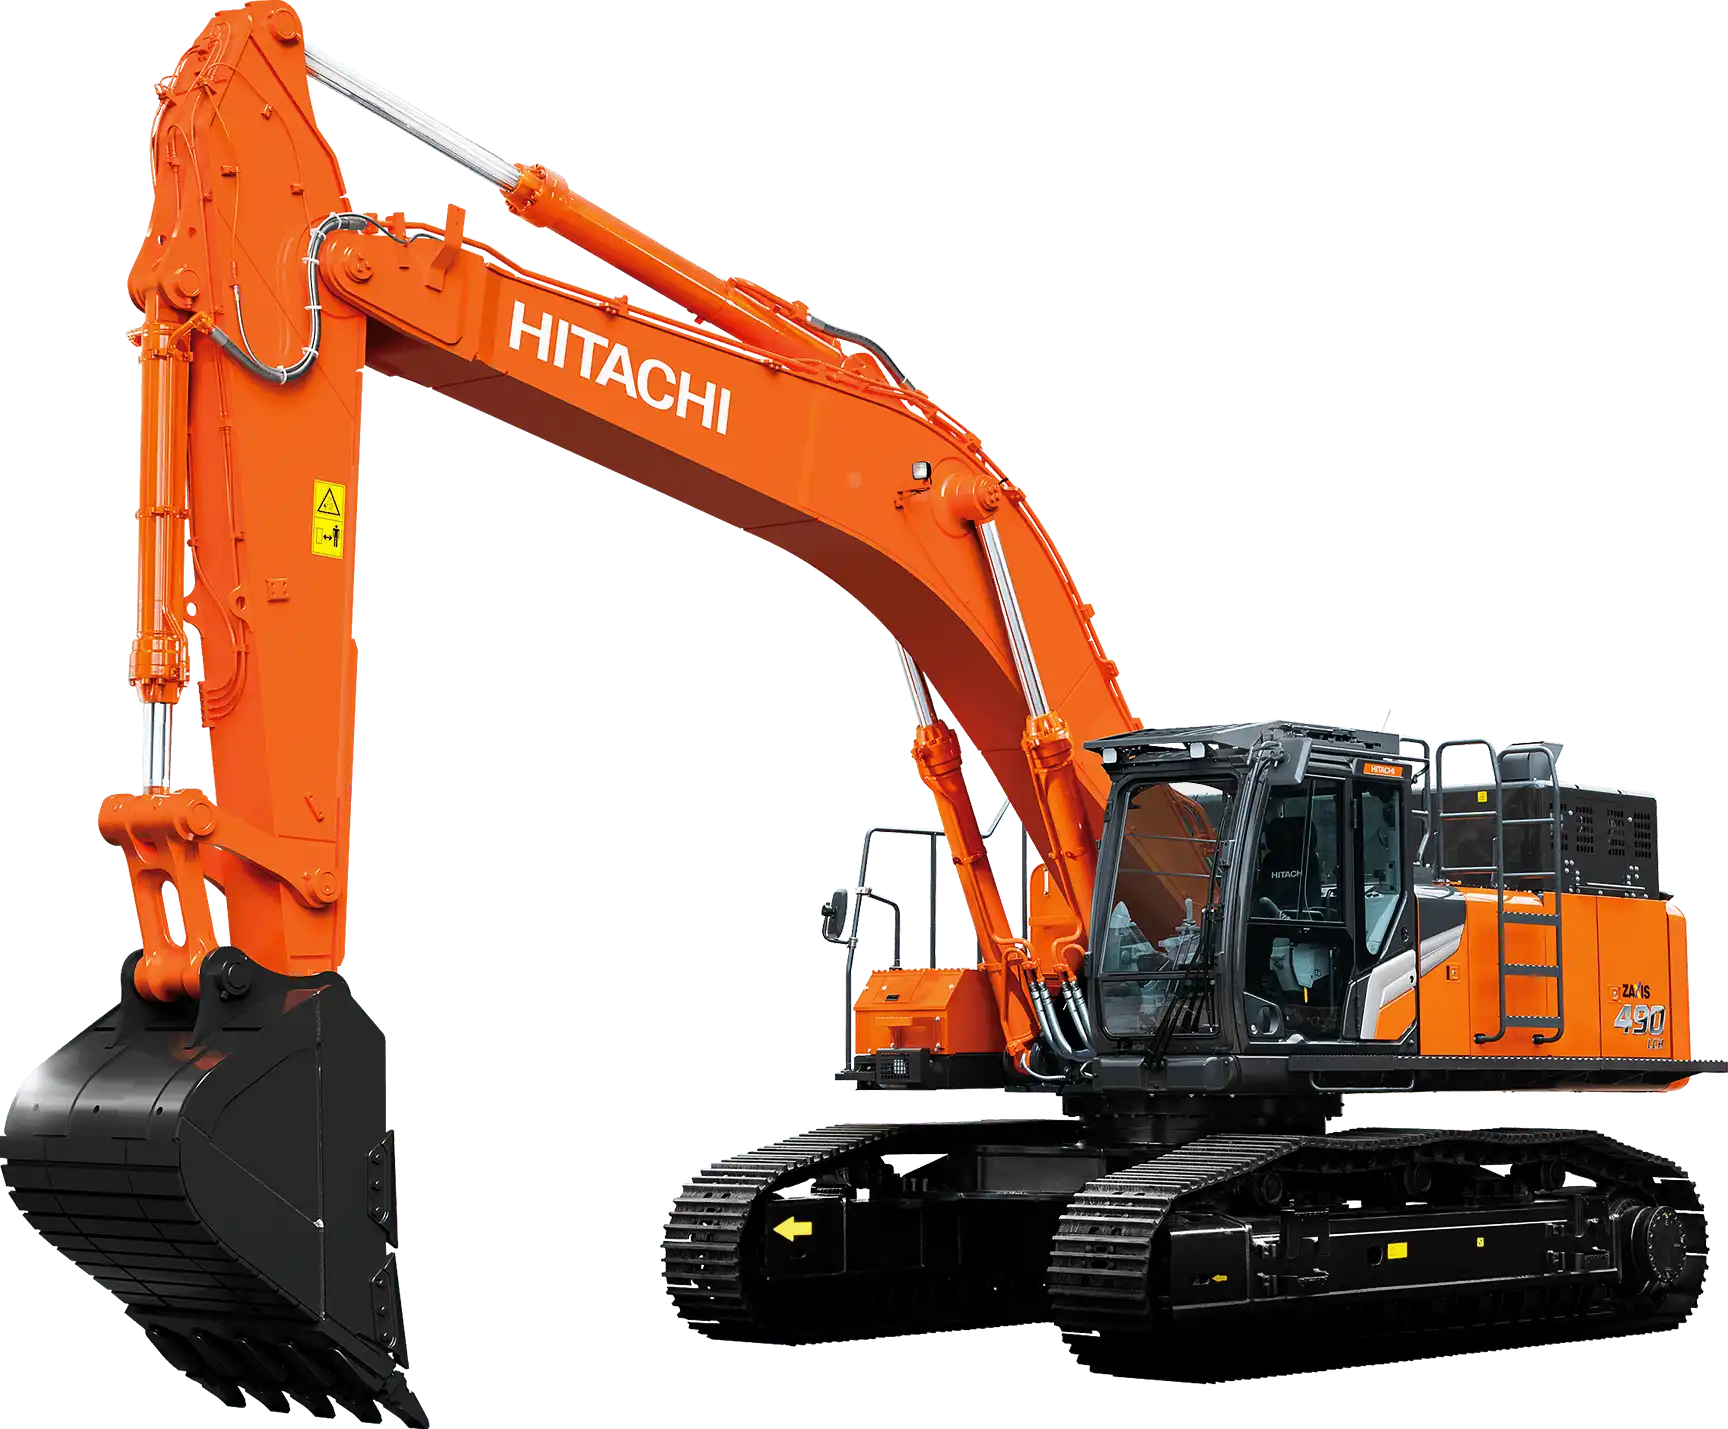 ZAXIS 7 SERIES 新型ZAXIS-7シリーズが、新登場 その手で、革新を操れ ...